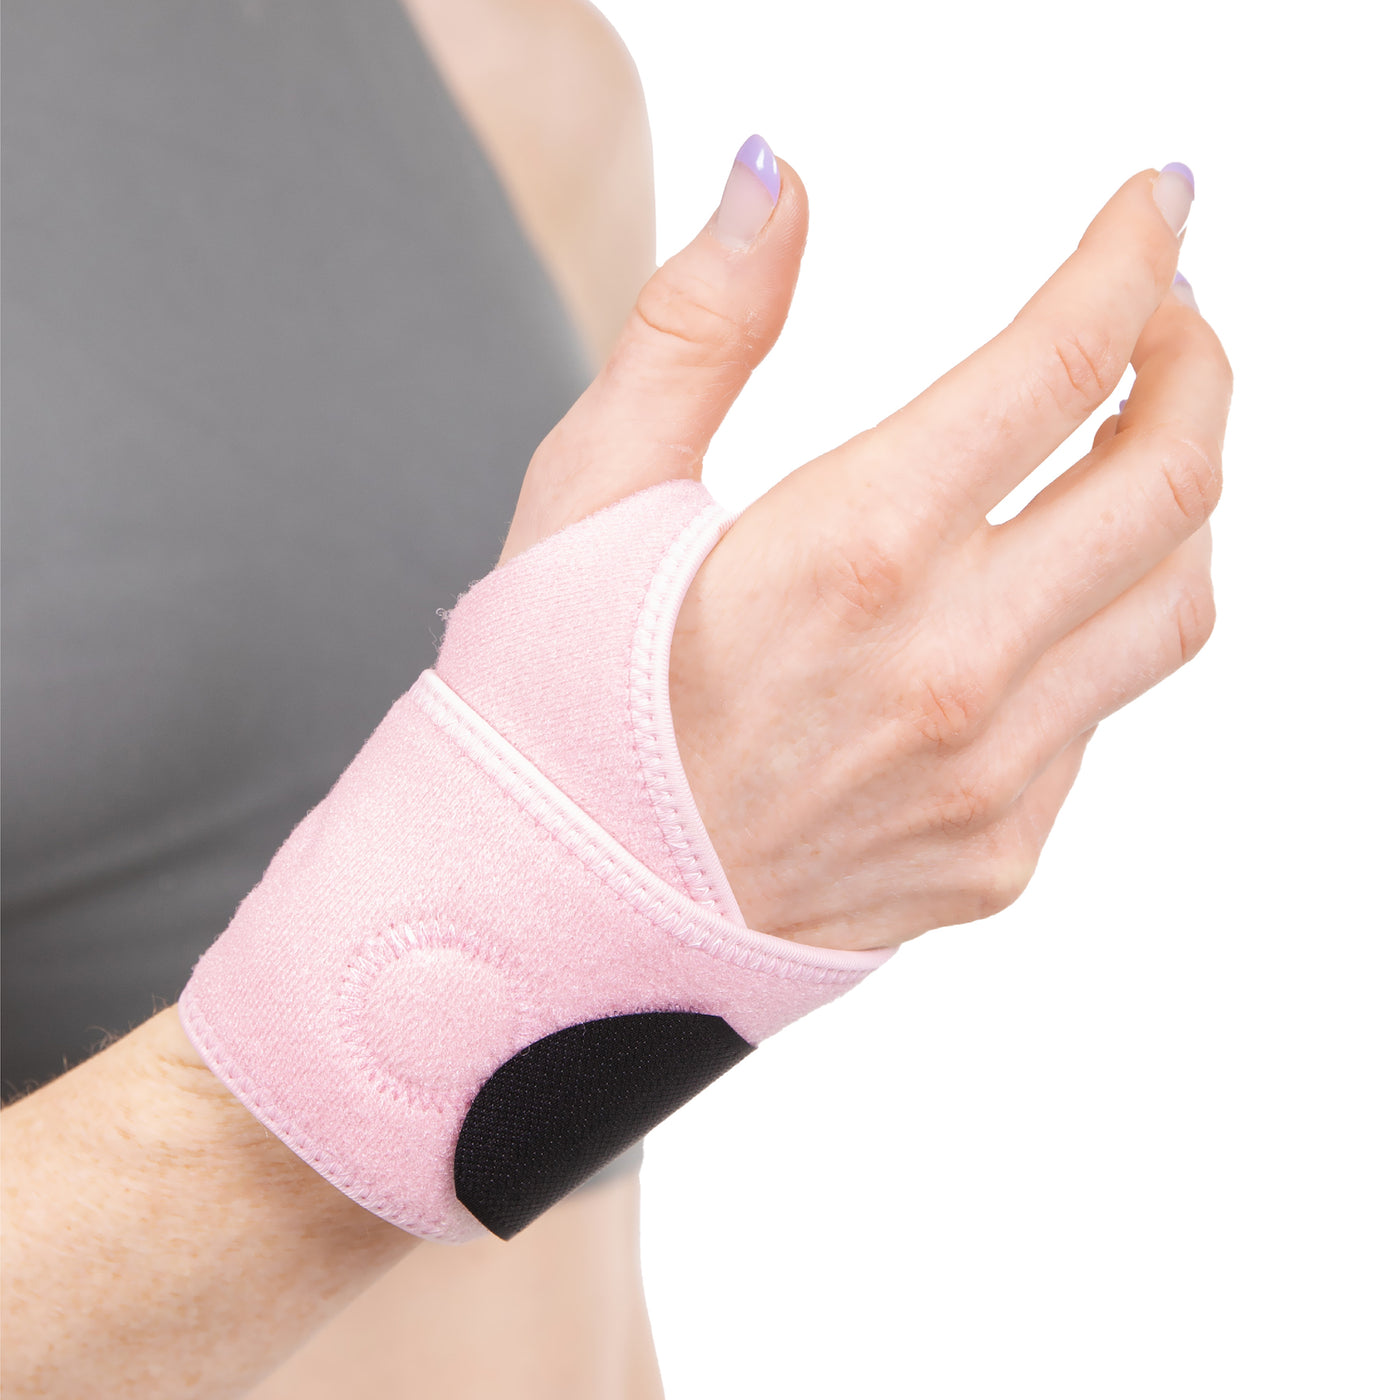 Smart Glove Carpal Tunnel Braces for Sale - Wrist Supports